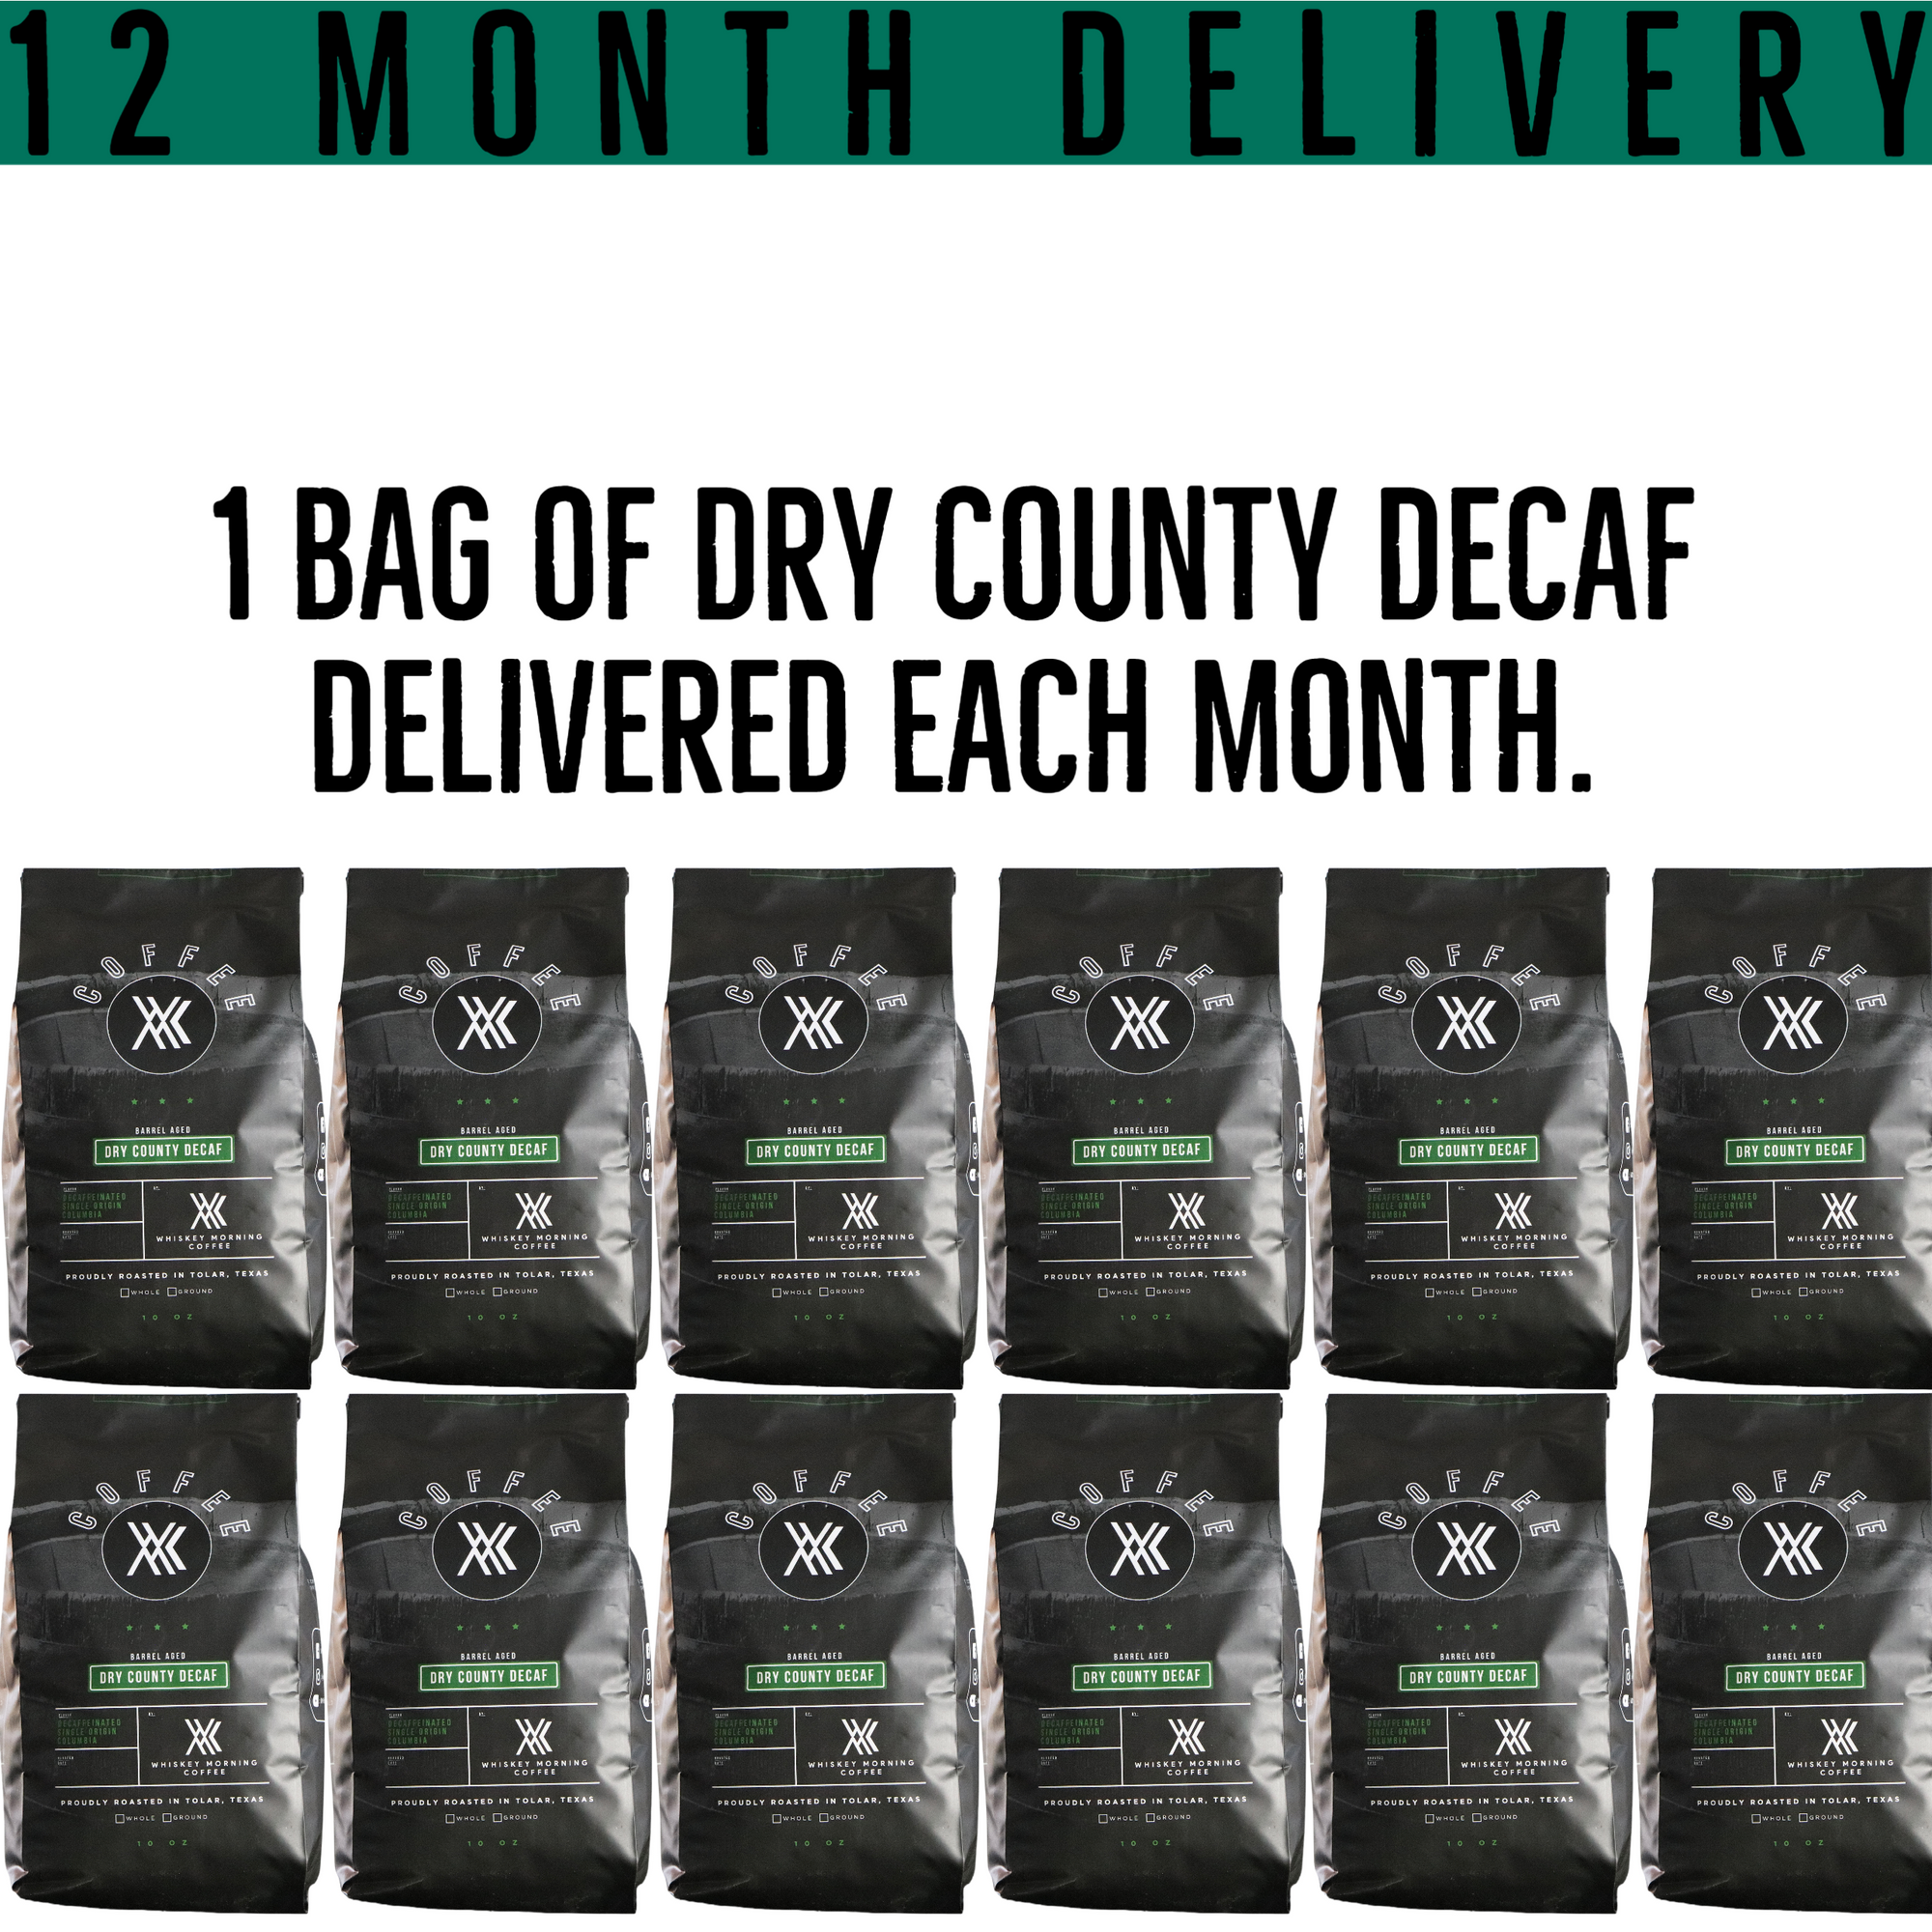 dry county decaf 12 month prepaid subscription